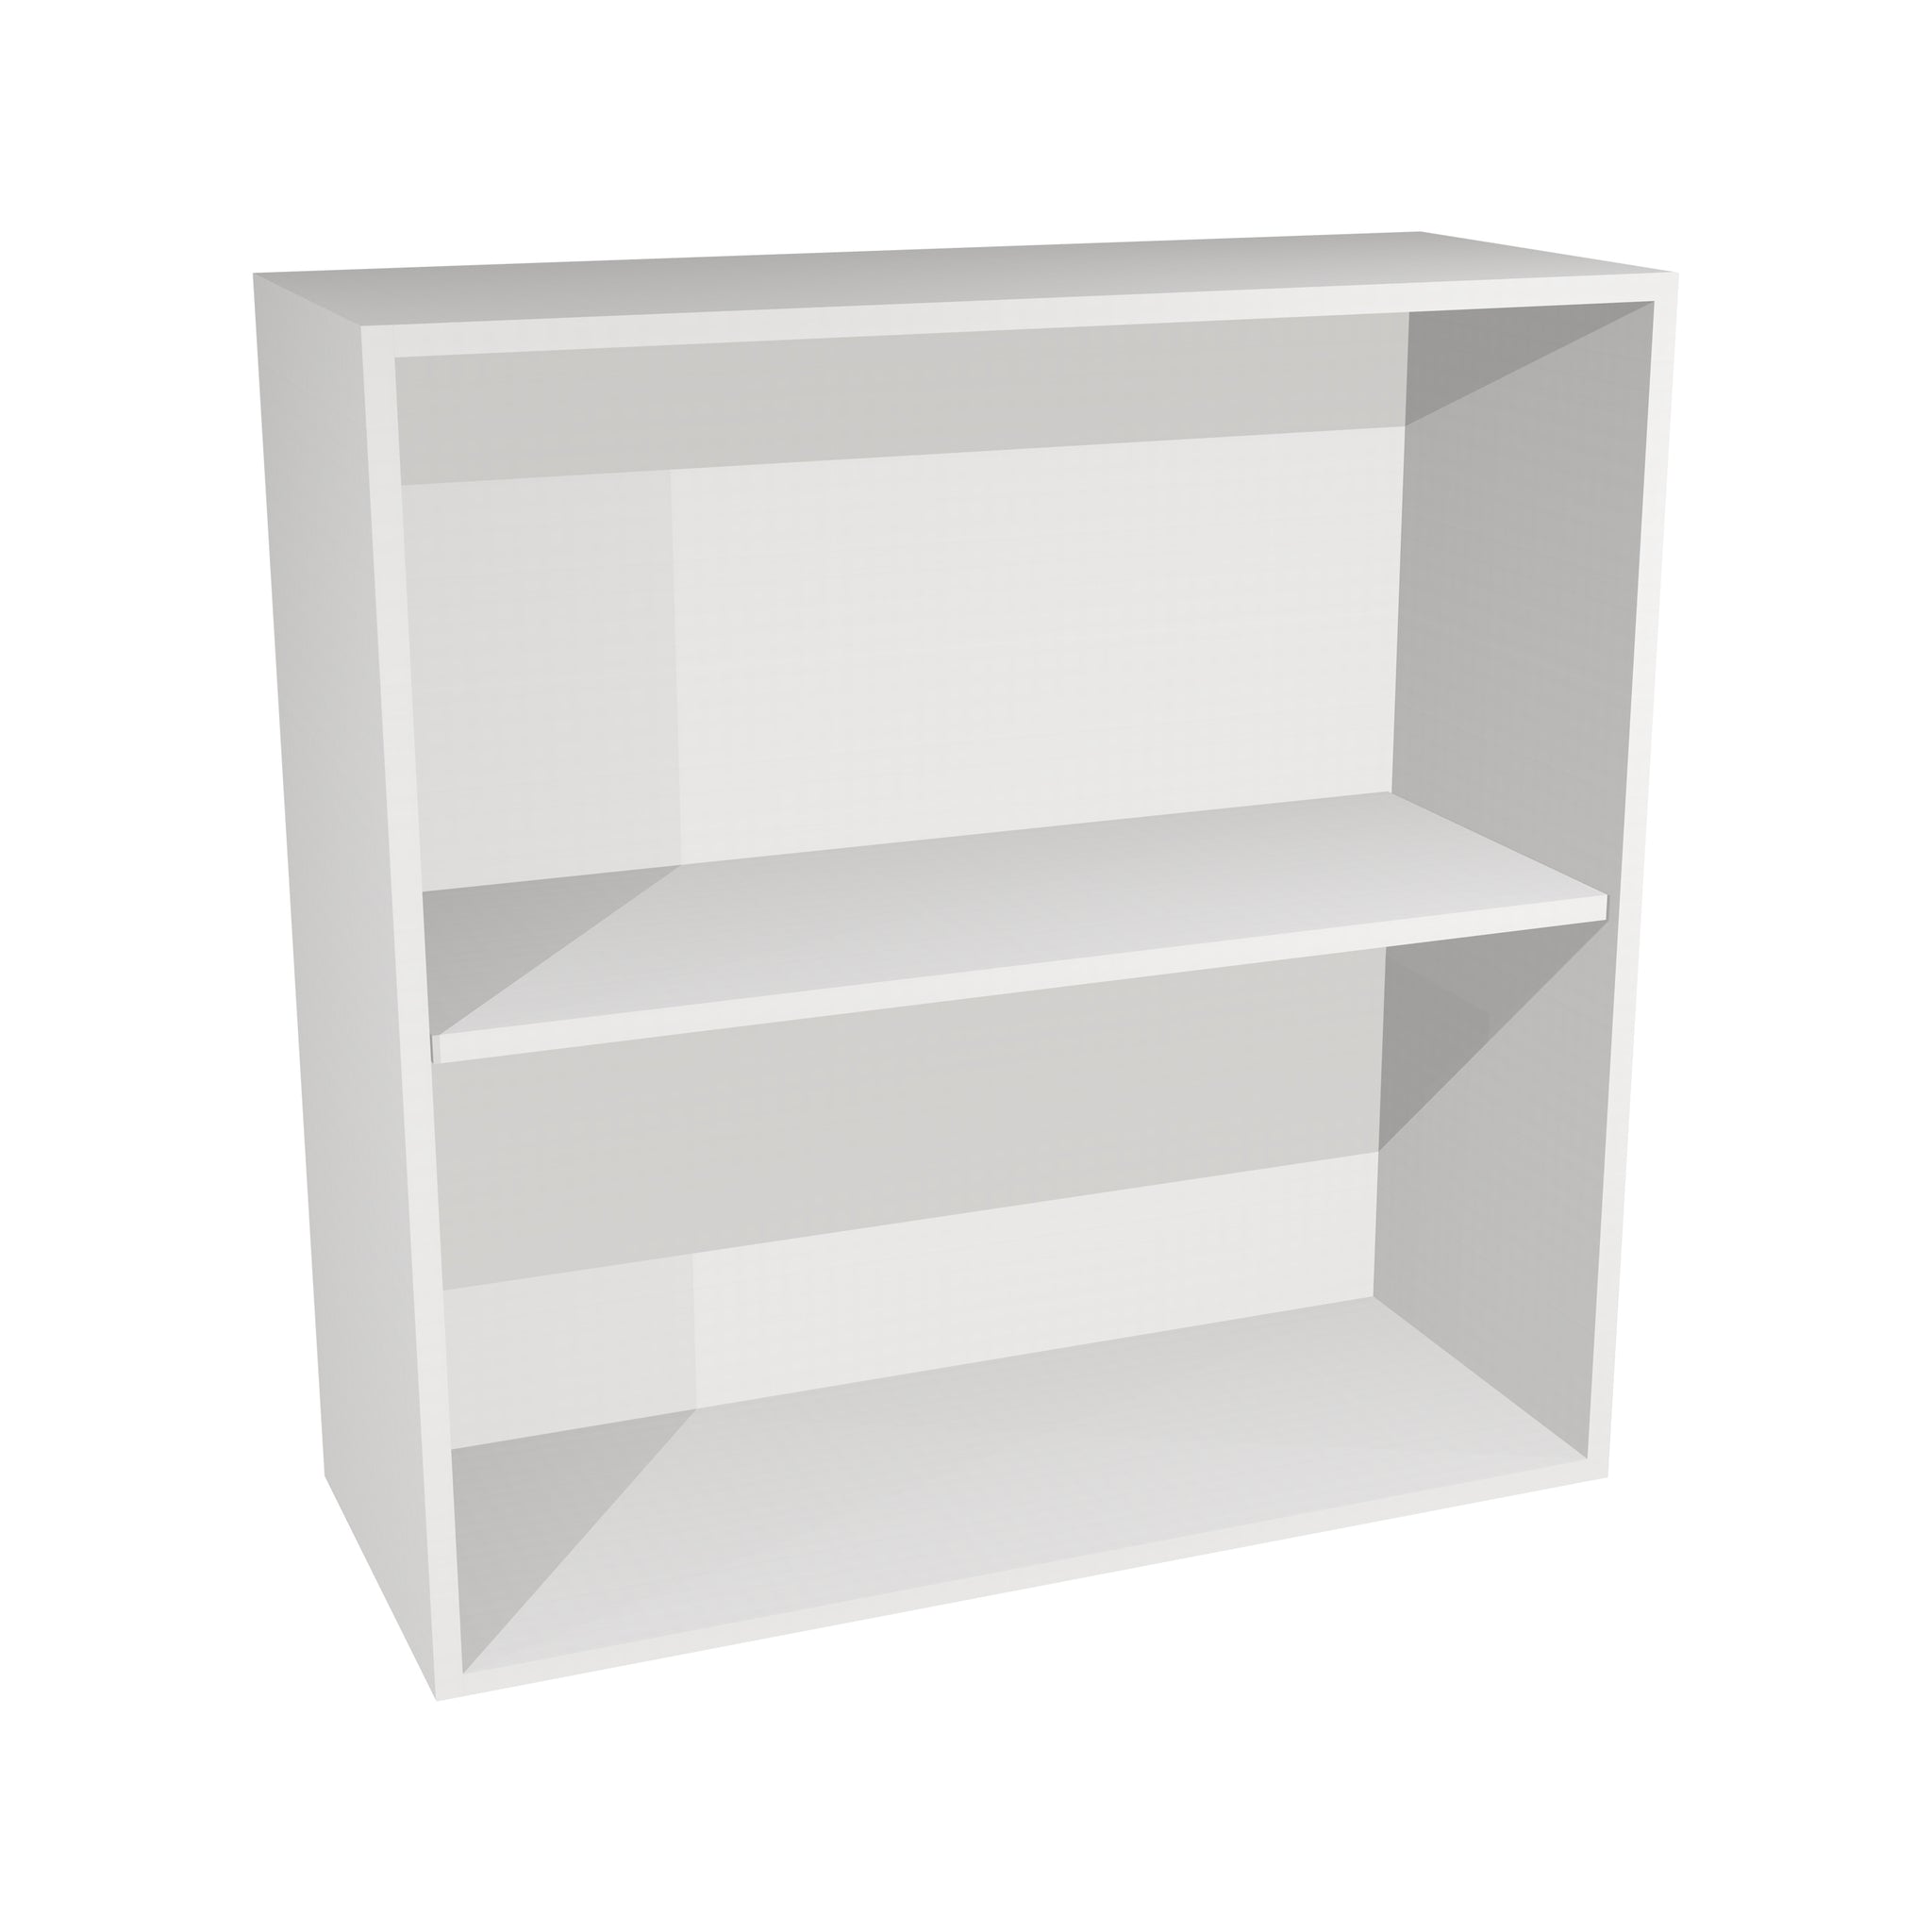 RTA - Lacquer White - Wall Open Cabinet | 36"W x 30"H x 12"D